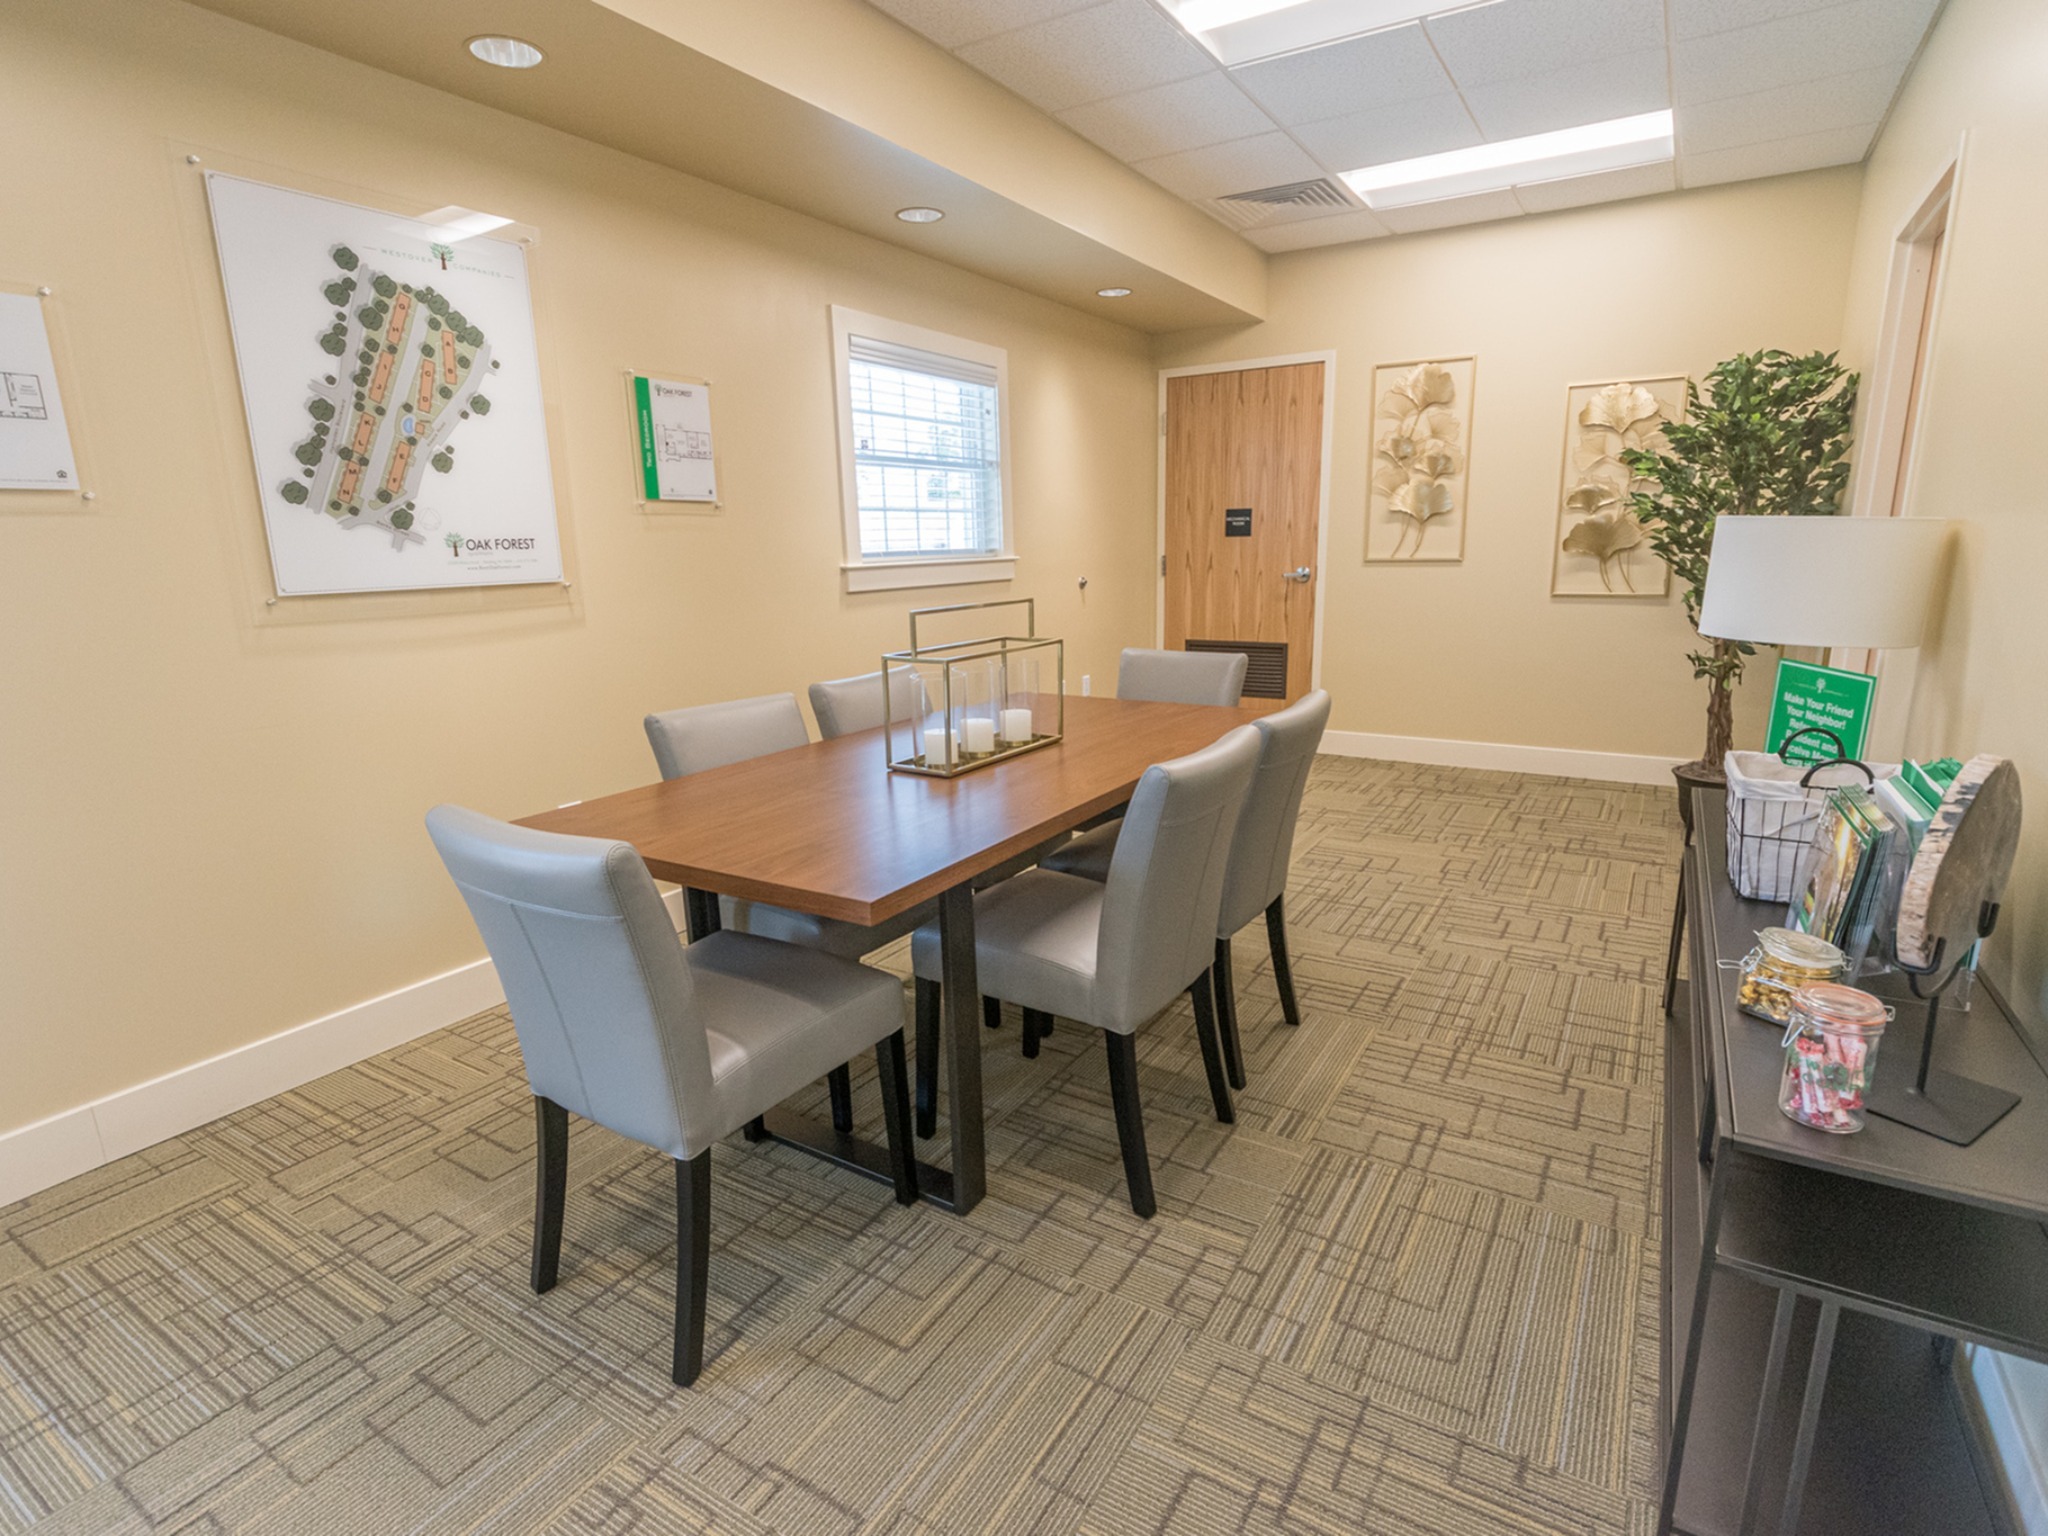 Oak Forest apartments community room area, fitted with a table and chairs, and carpet flooring